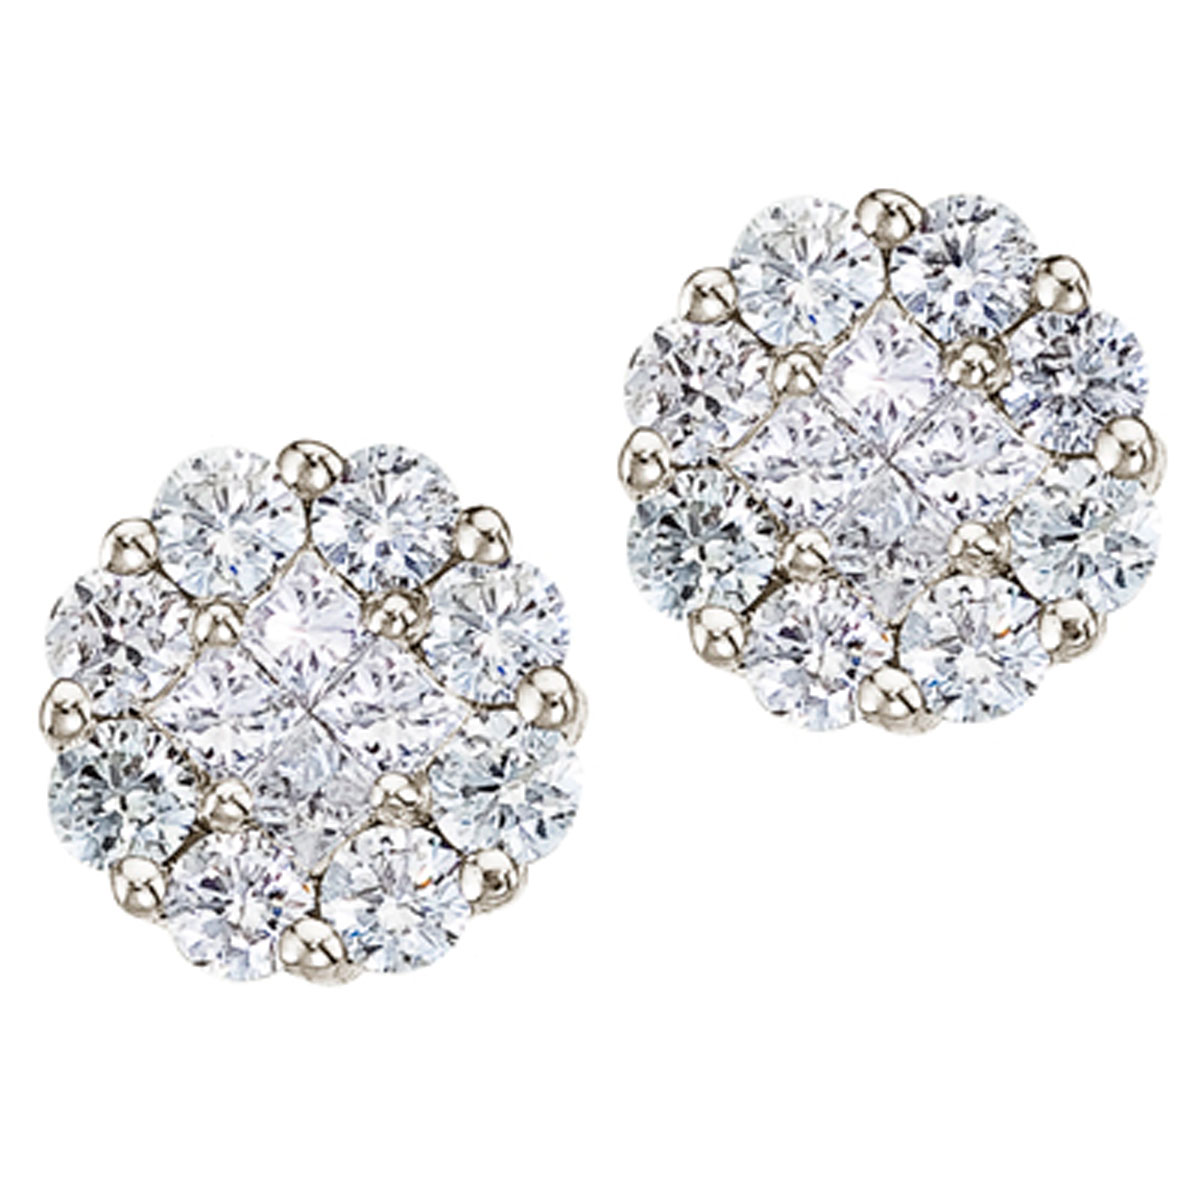 Gorgeous 14k white gold earrings with a full carat of shimmering genuine diamonds. Clustaires give all the sparkling elegence of a solitaire at a fraction of the price.